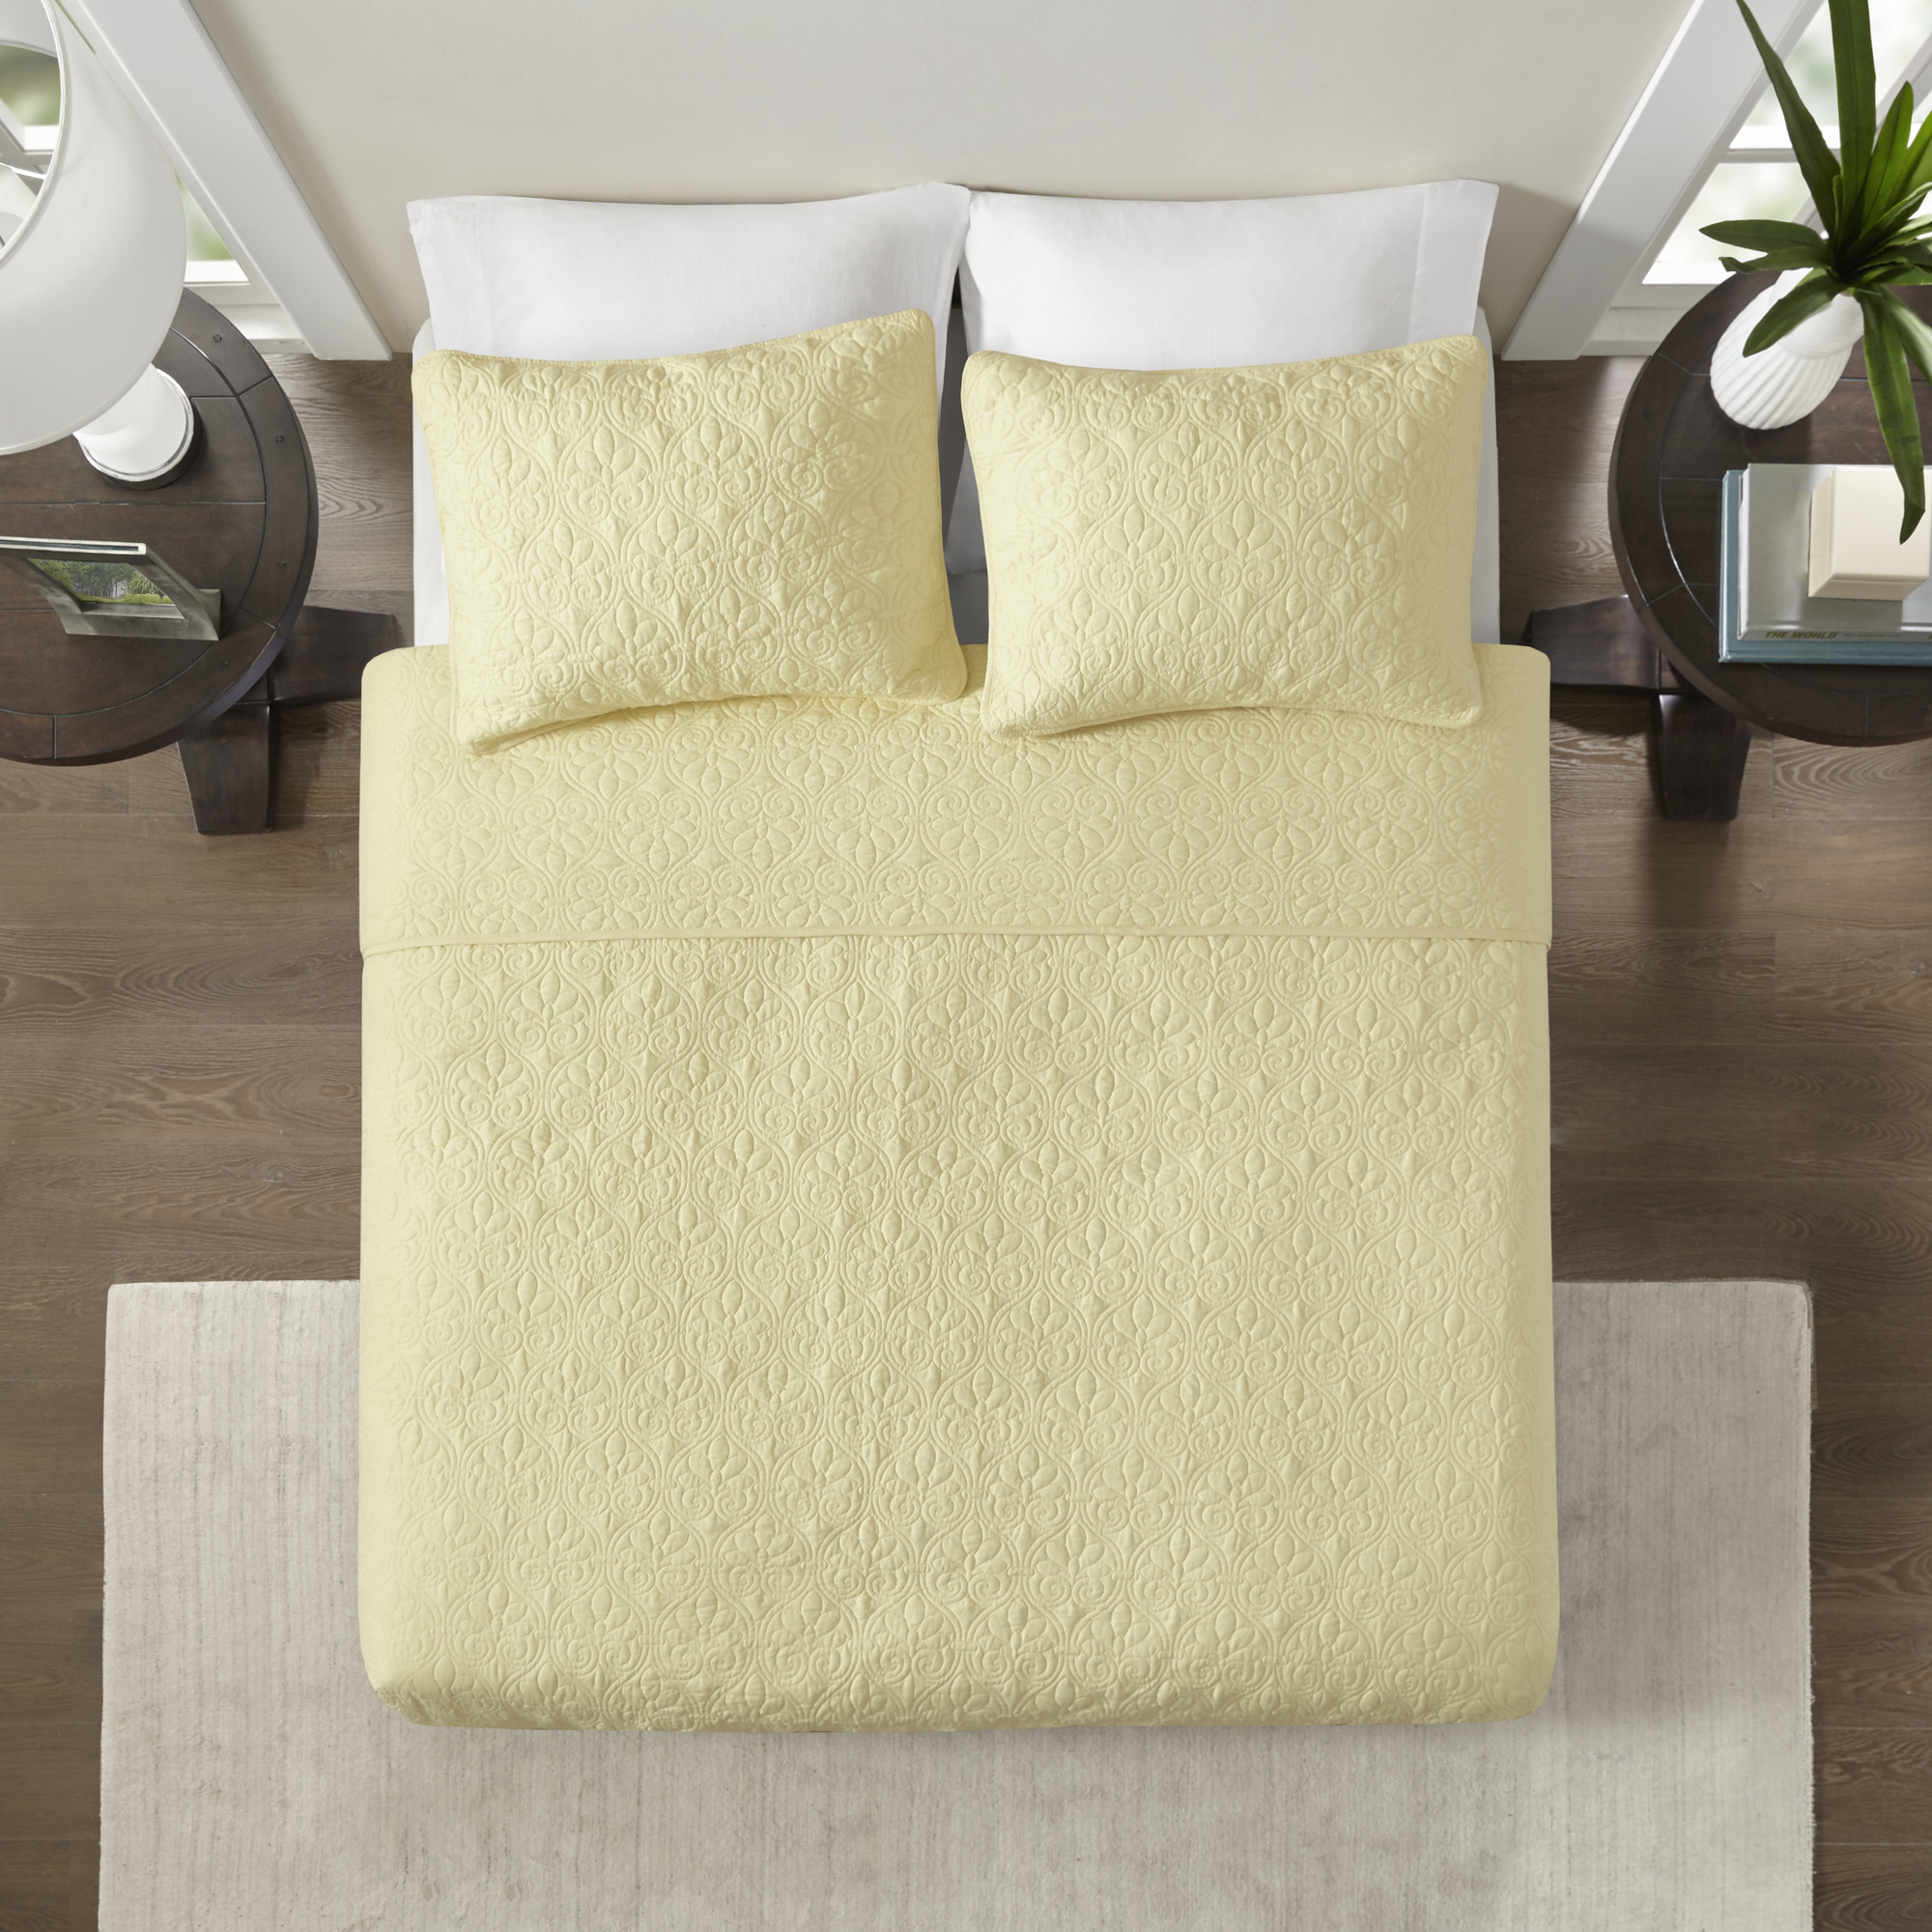 Home Essence Vancouver Super Soft Reversible Coverlet Set, Full/Queen, Yellow - image 2 of 14